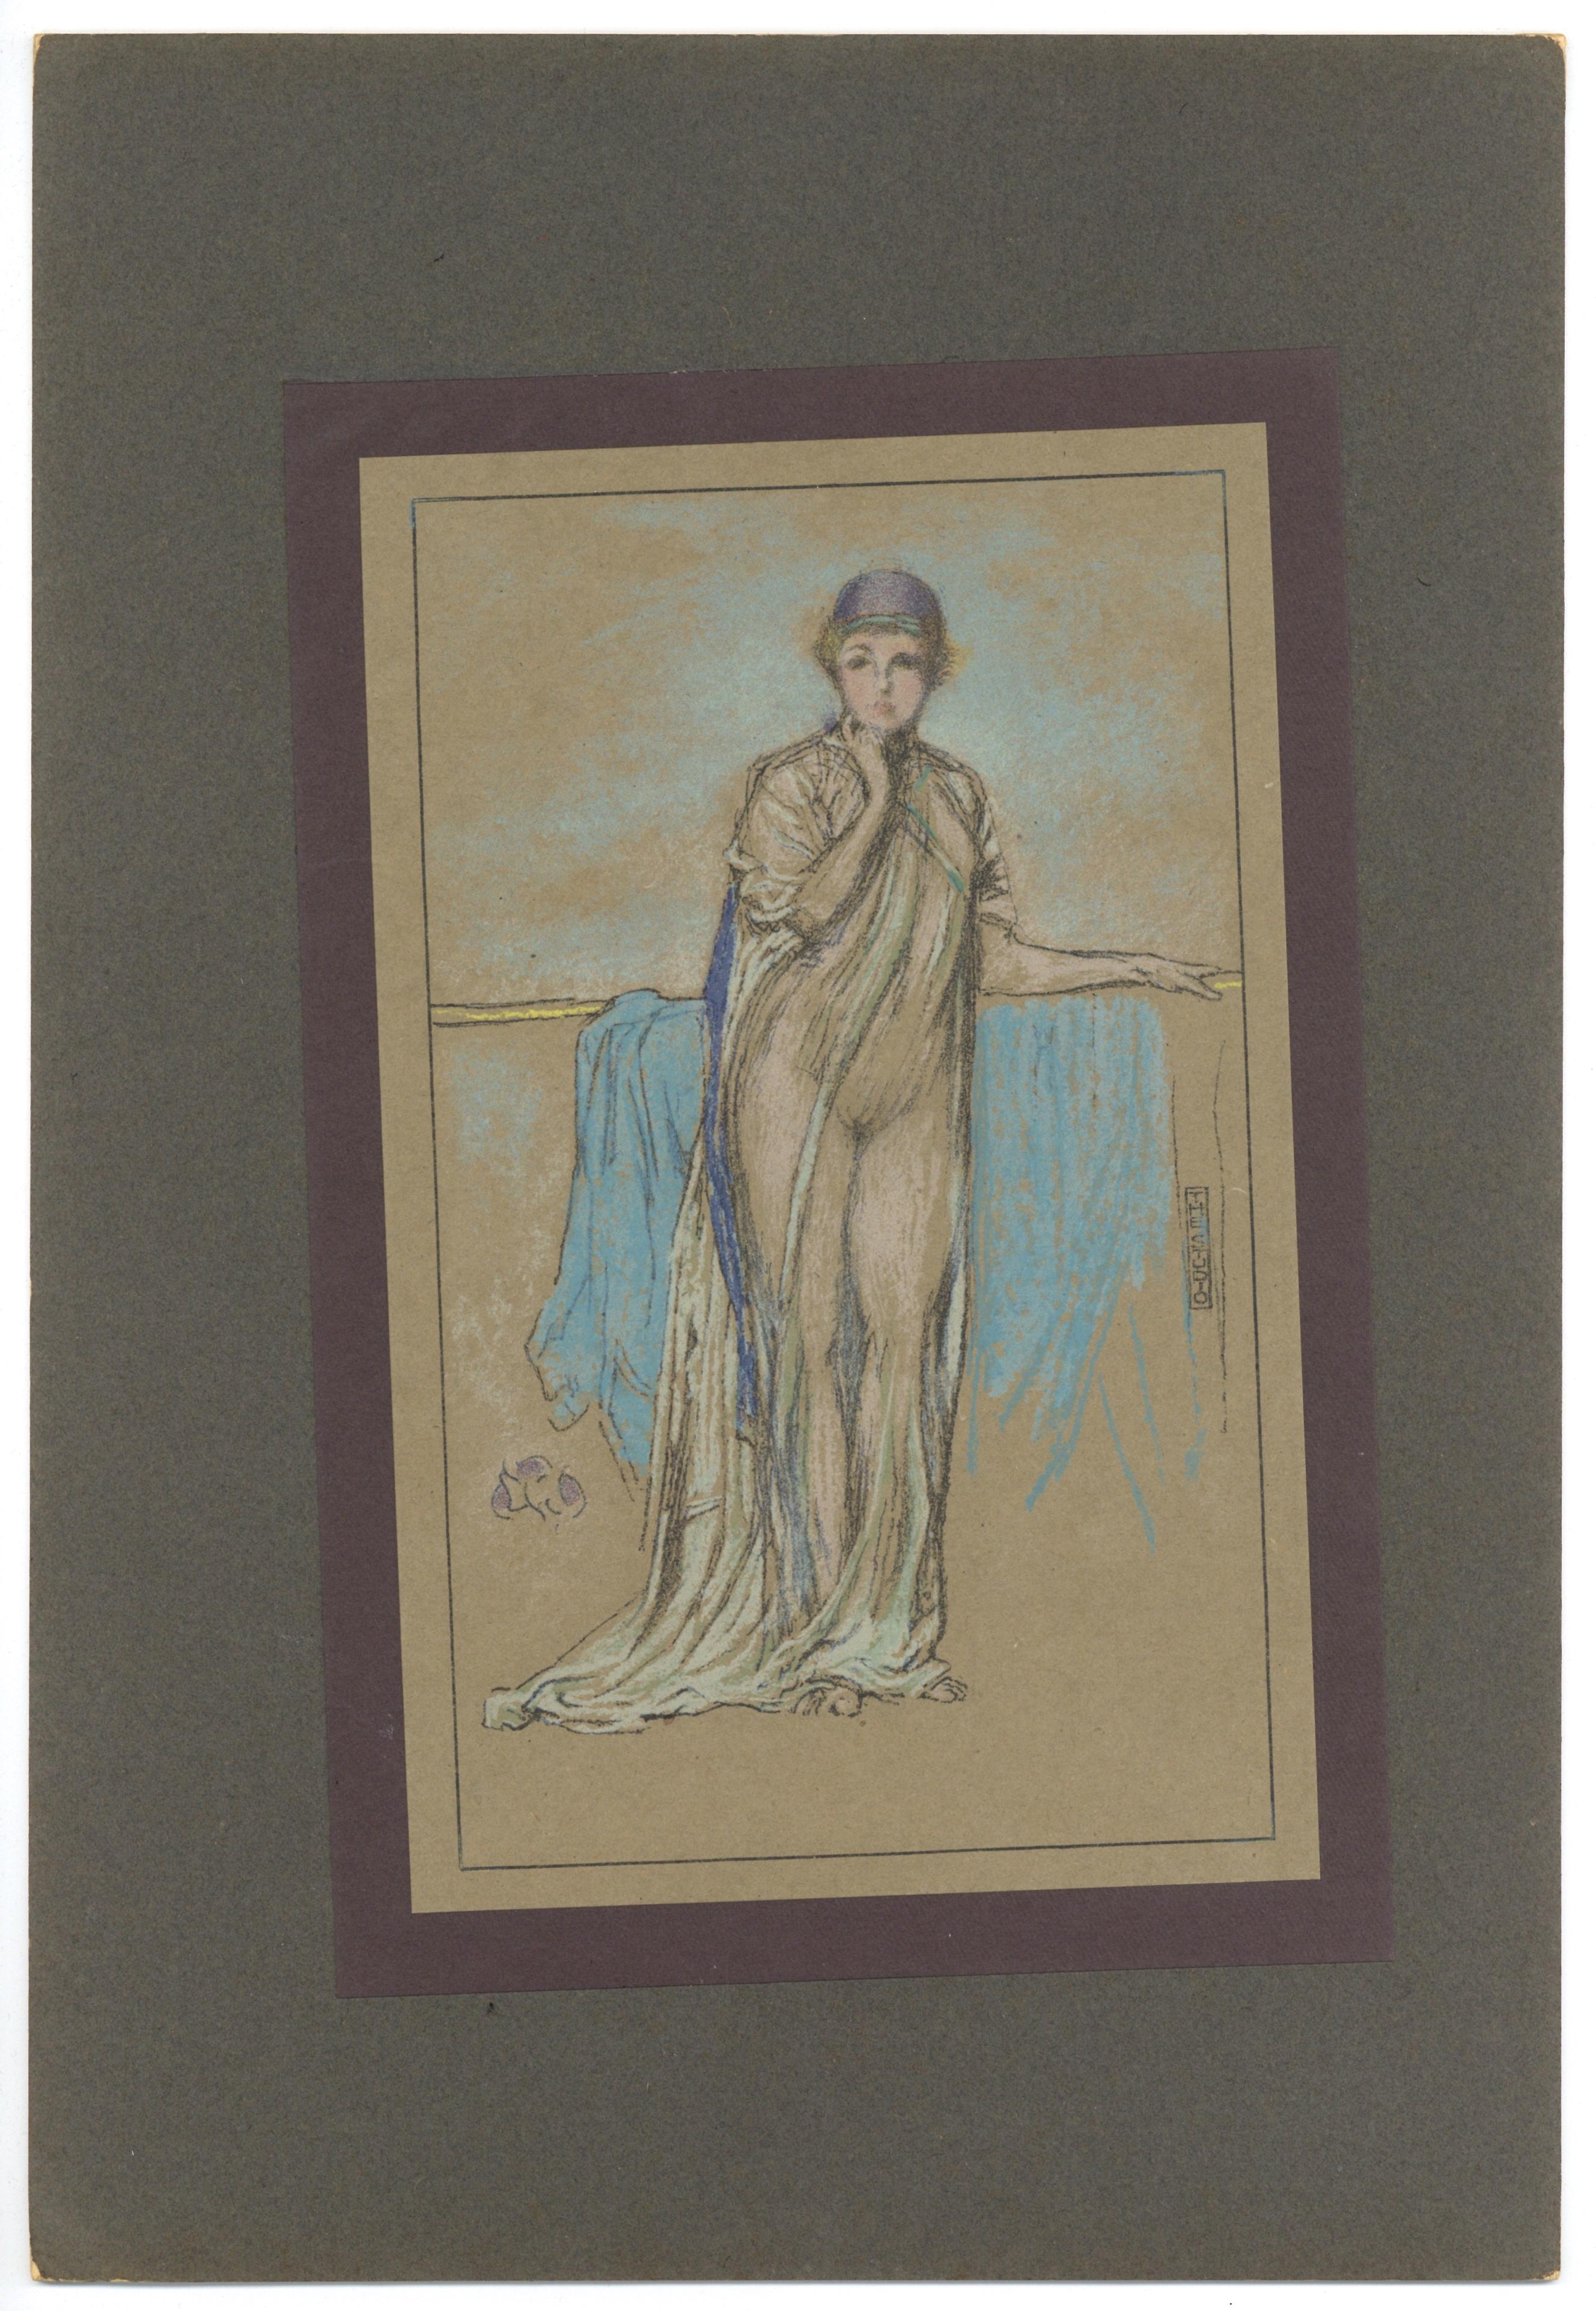 Medium: lithograph (after the pastel). The lithography was executed by Whistler's friend and fellow artist Thomas Way, and published in London by The Studio in 1905 for a rare deluxe portfolio. Printed on smooth wove paper, the lithograph measures